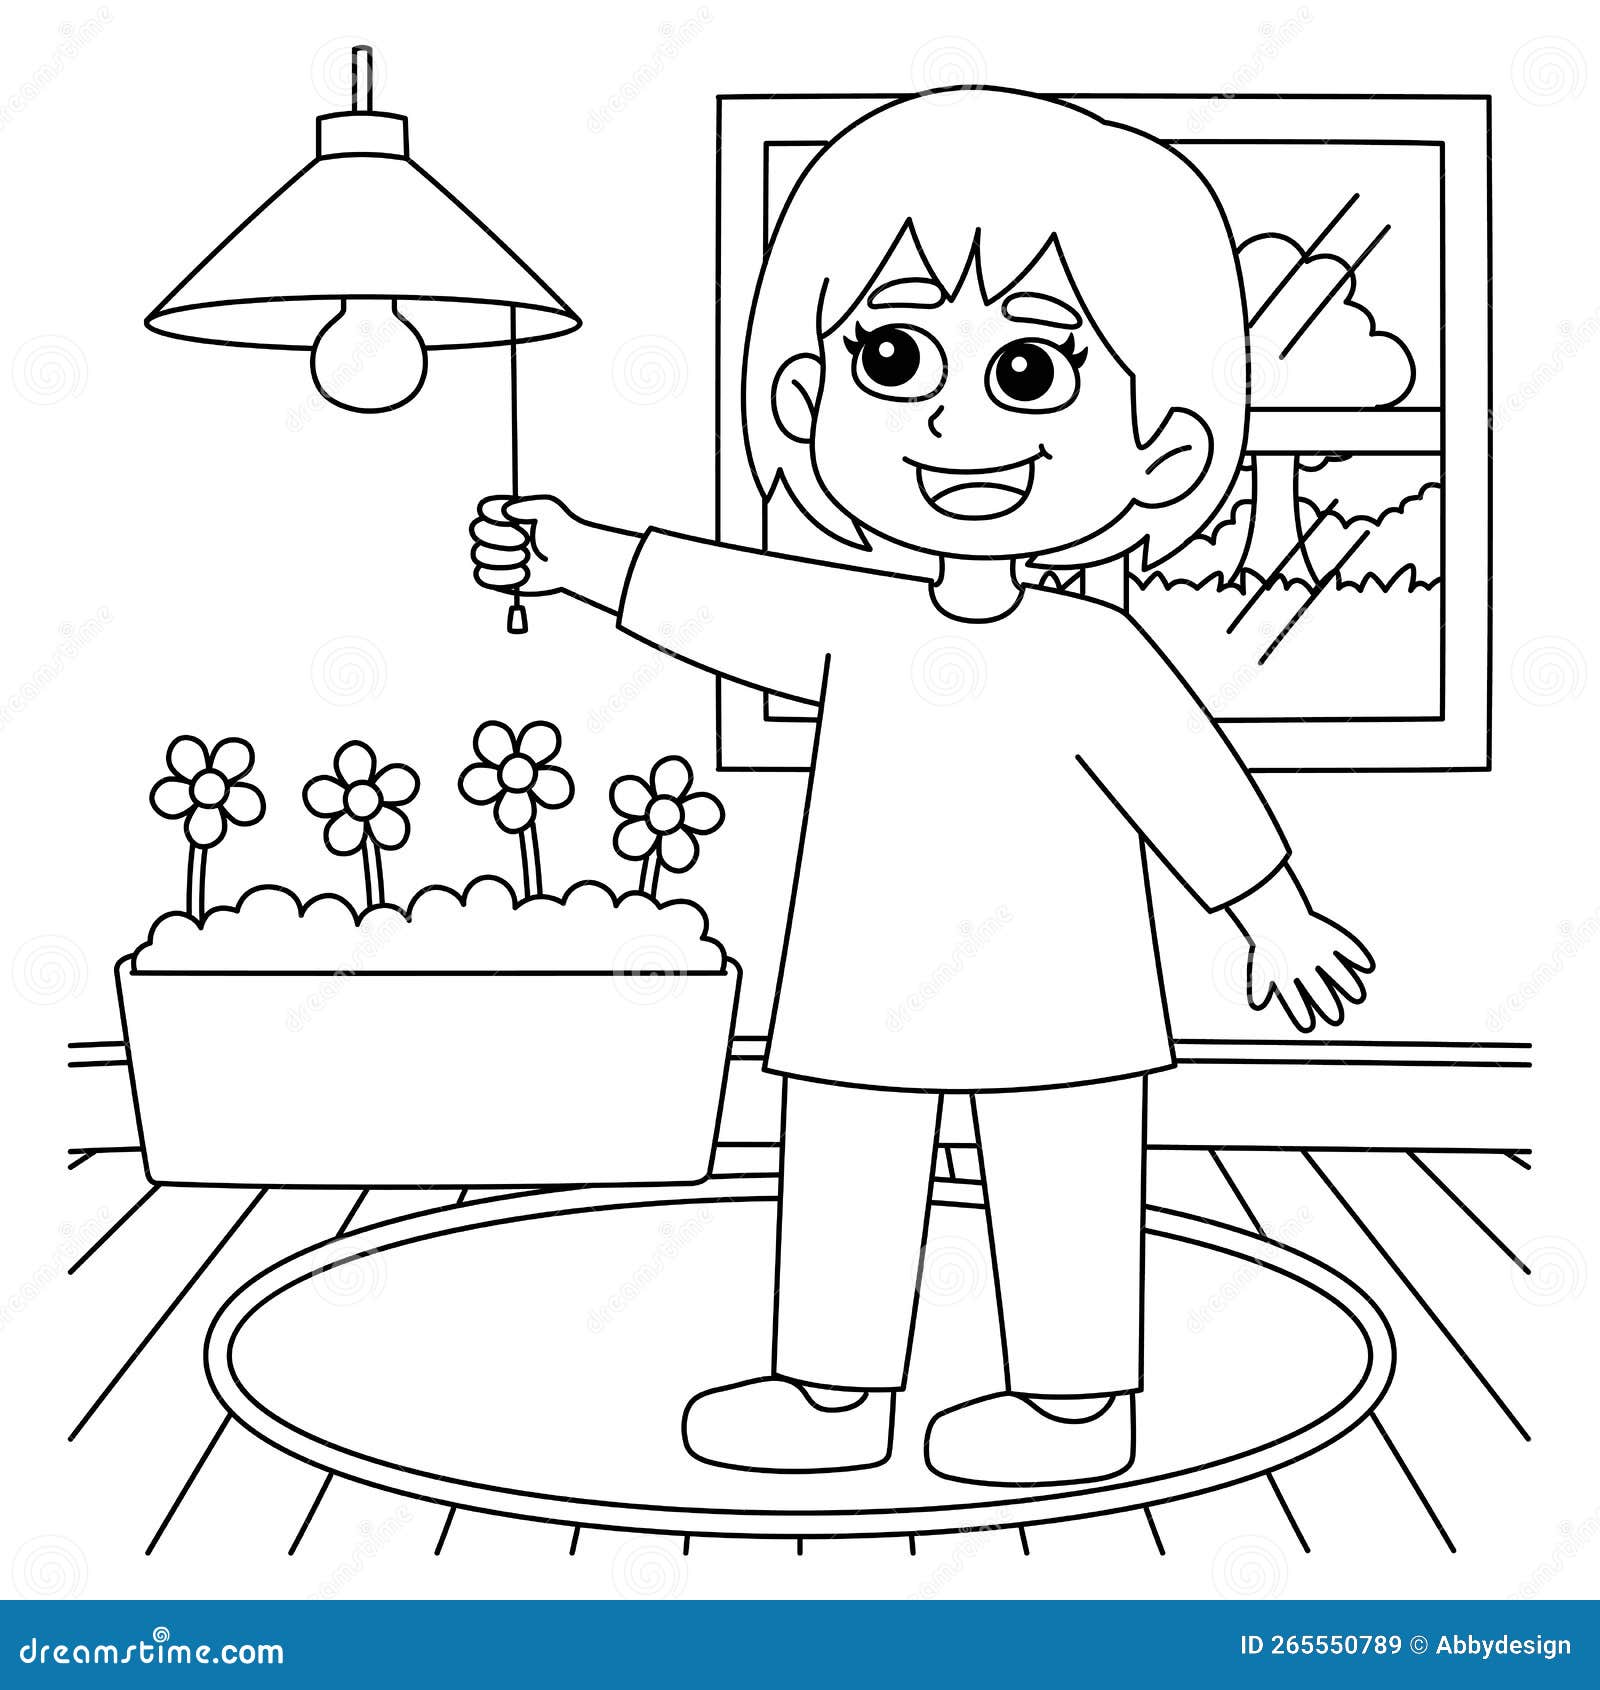 girl conserving energy coloring page for kids